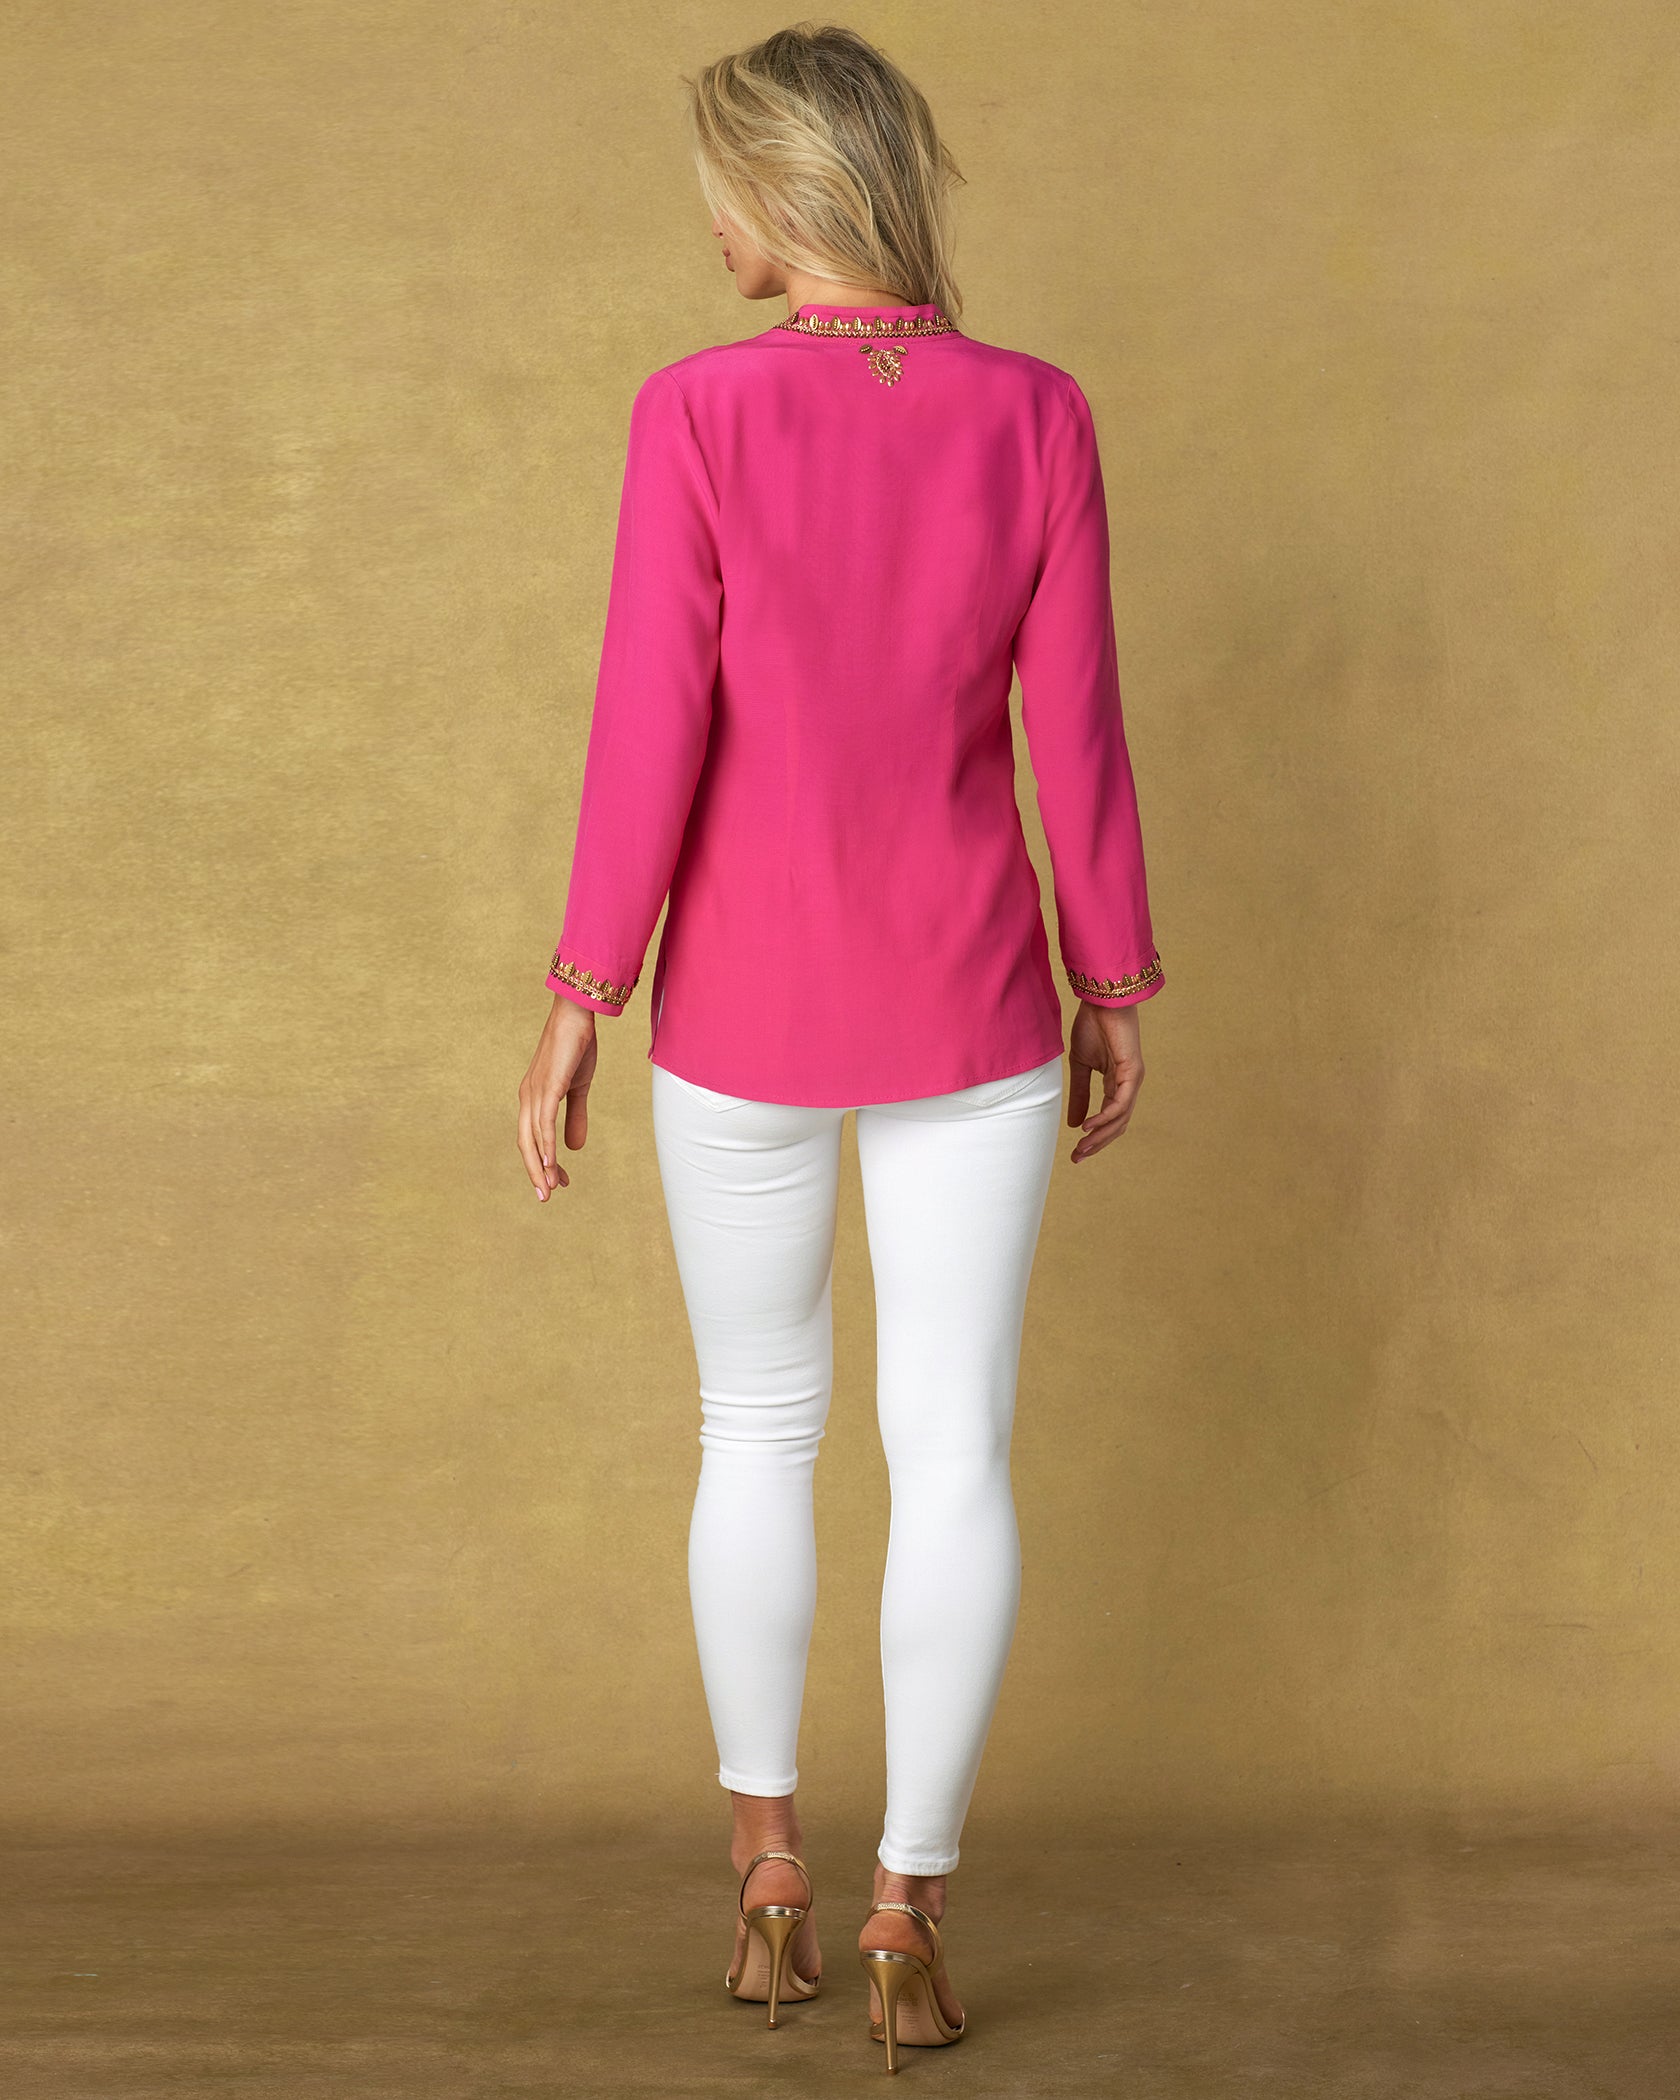 Callista Tunic in Hot Pink and Gold Embellishment-Back View